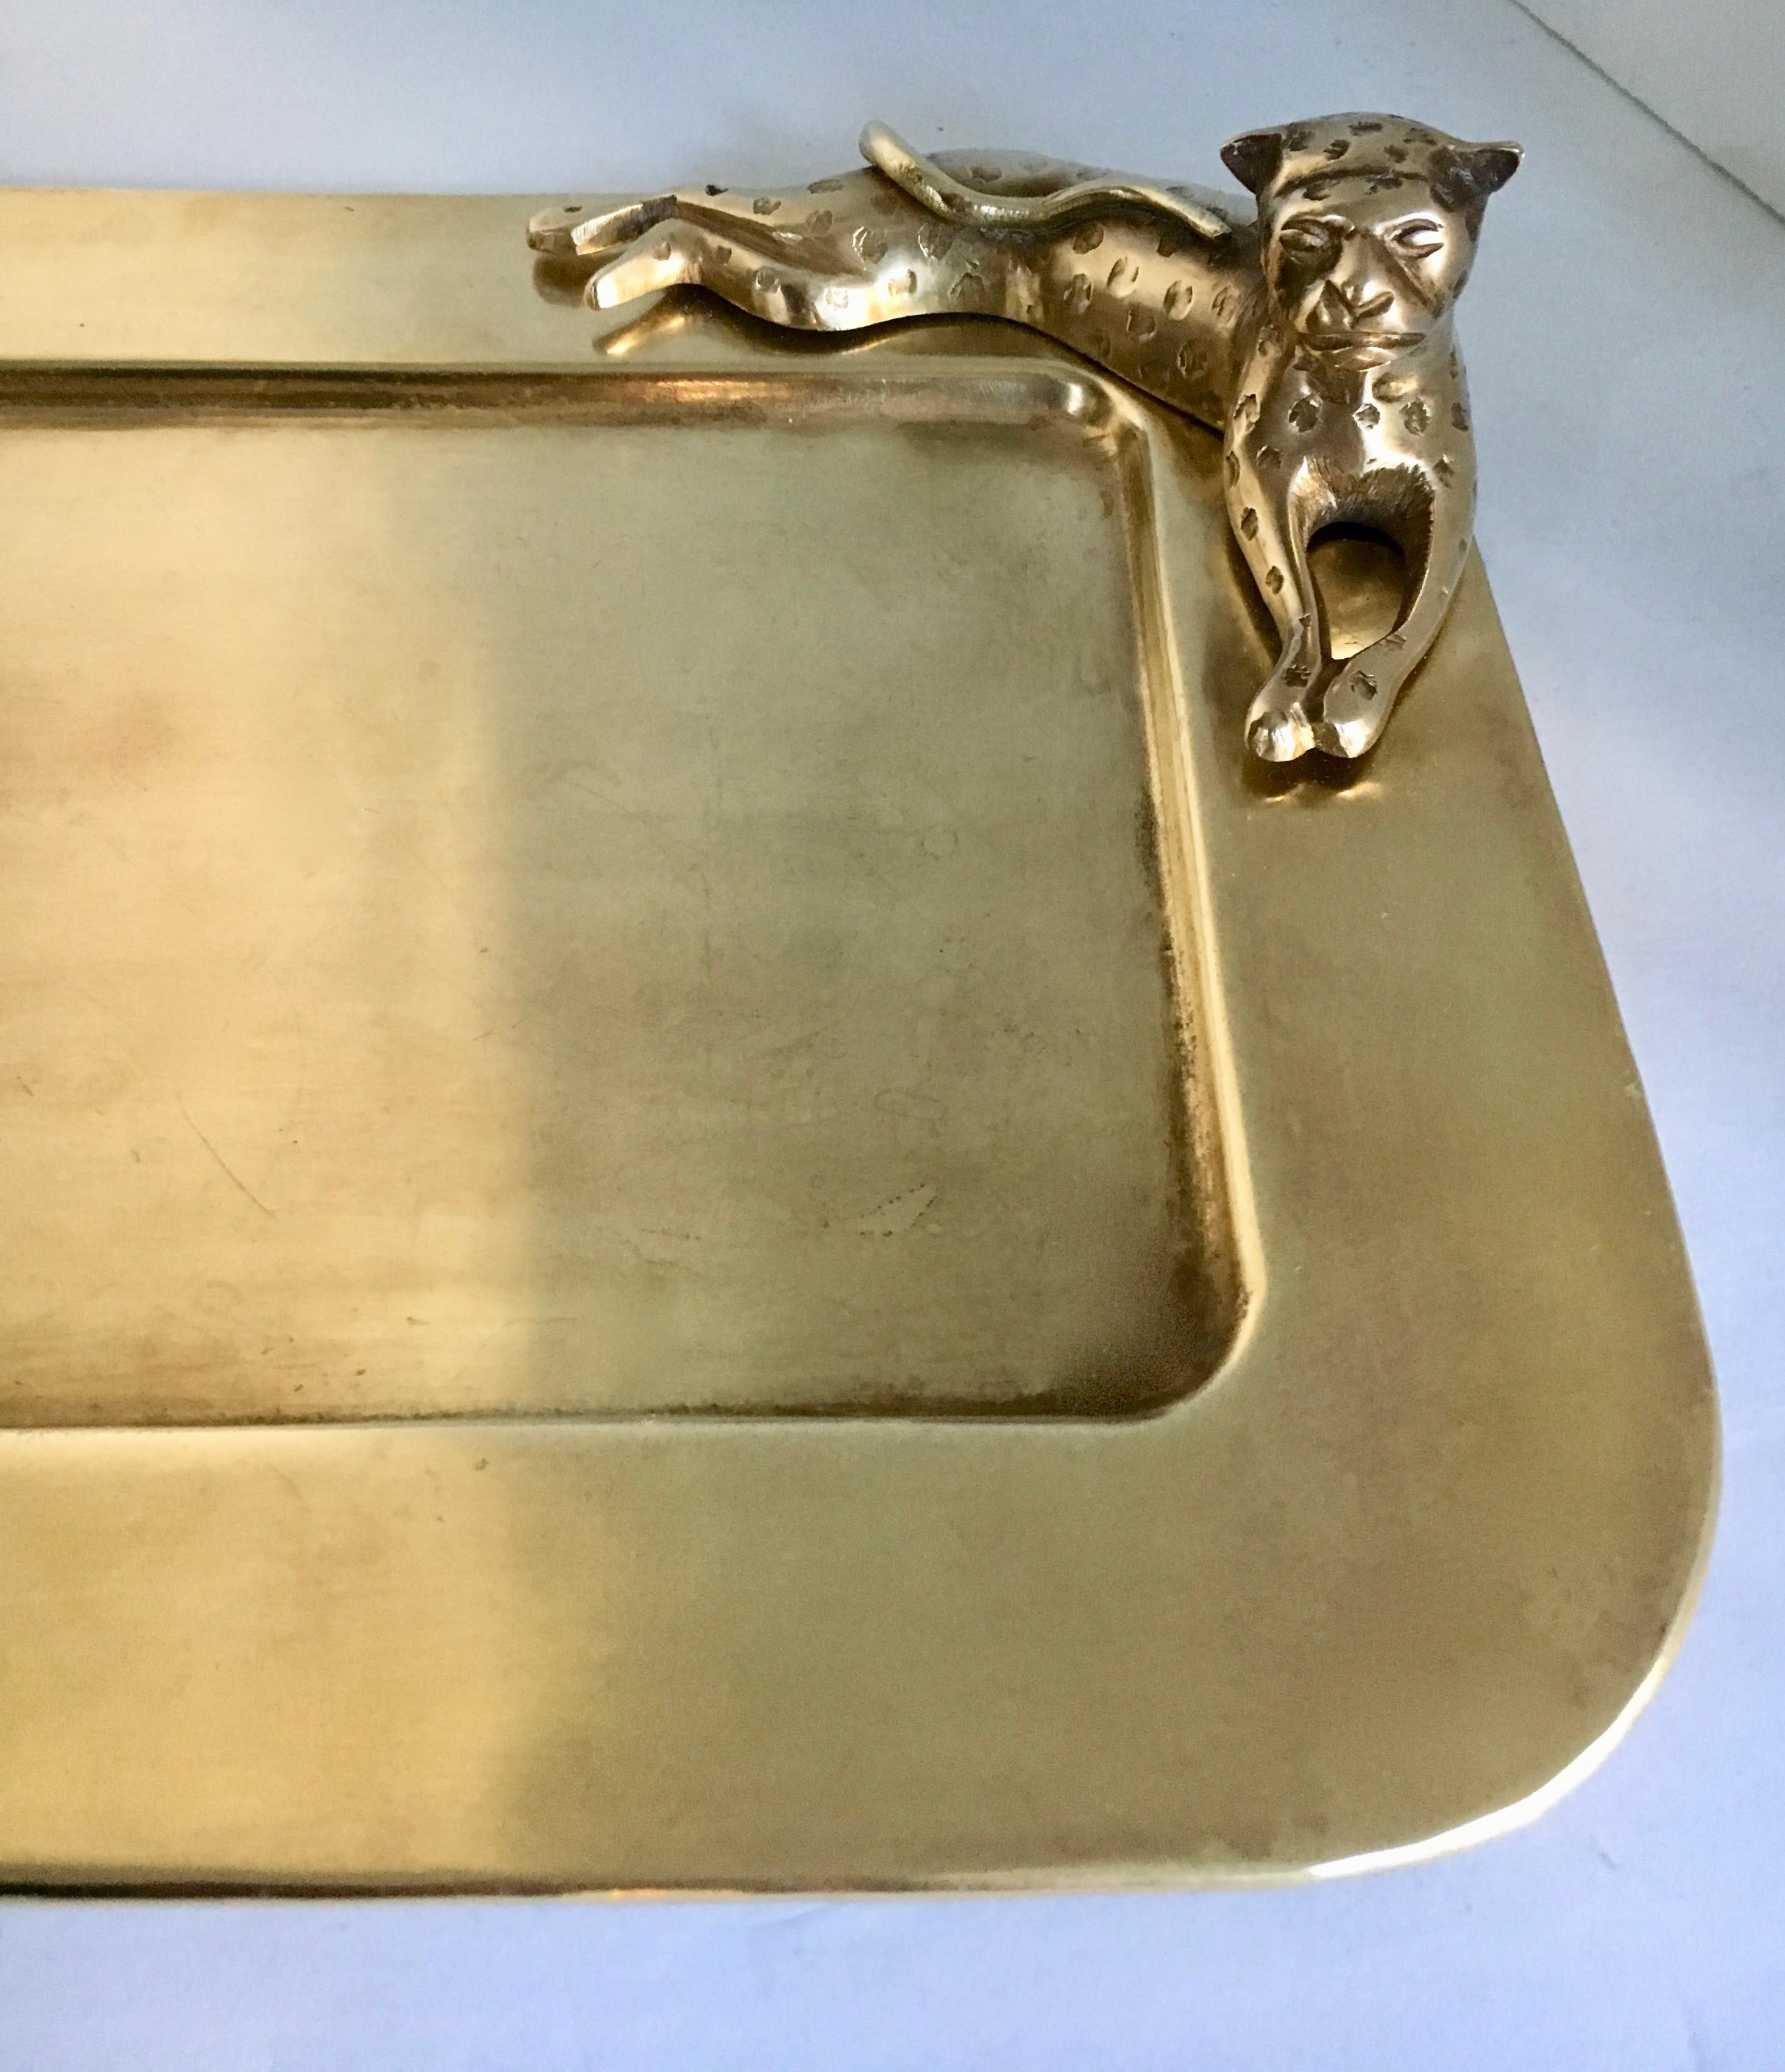 A beautiful brass tray with a 3-D Cheetah sitting on one corner. This tray is perfect for the desk, bar or serving. See how we display for serving drinks, catching mail, etc.